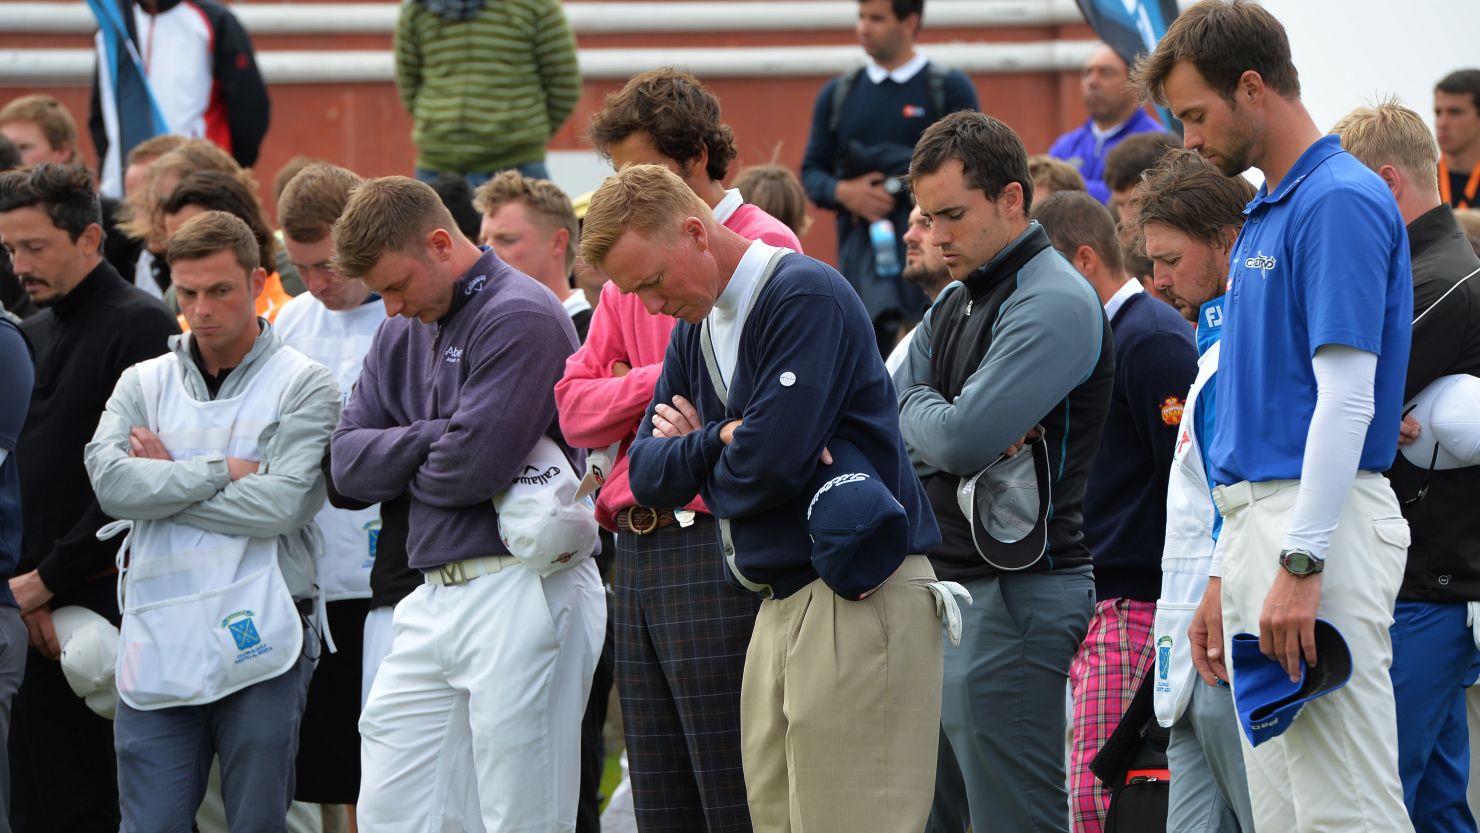 Players and caddies observe a minute's silence for Iain McGregor following his death at the Madeira Islands Open.